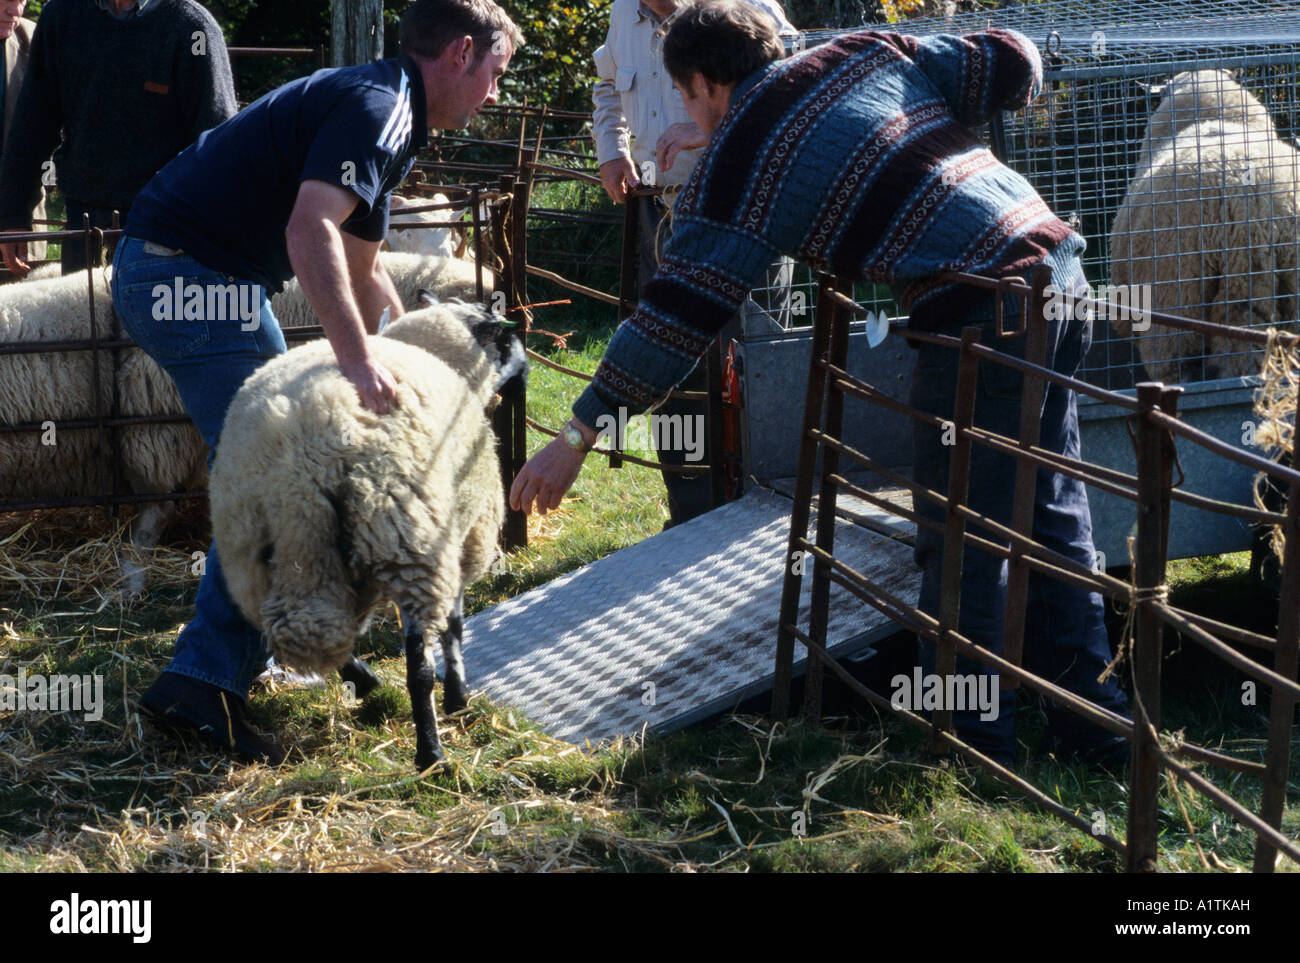 Ram being loaded after sale at the annual Llanidloes breeding sheep sale. Held the first friday in October. Powys, Wales, UK. Stock Photo